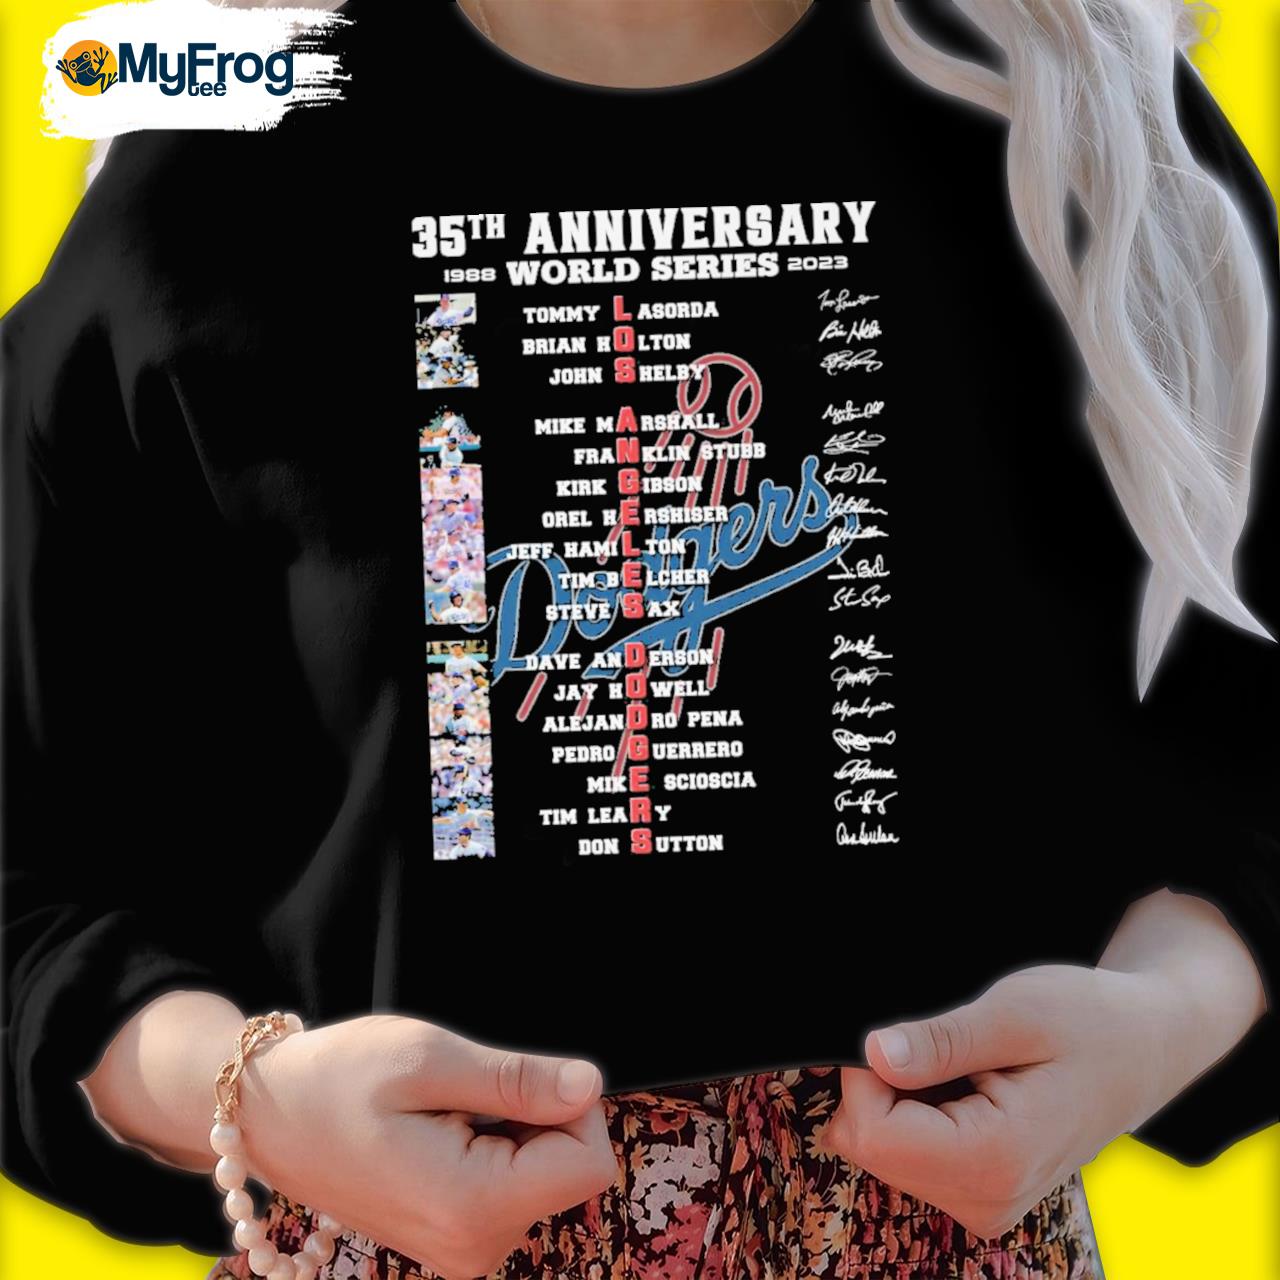 35th anniversary 1988 world series Dodgers signatures shirt, hoodie,  sweater and long sleeve